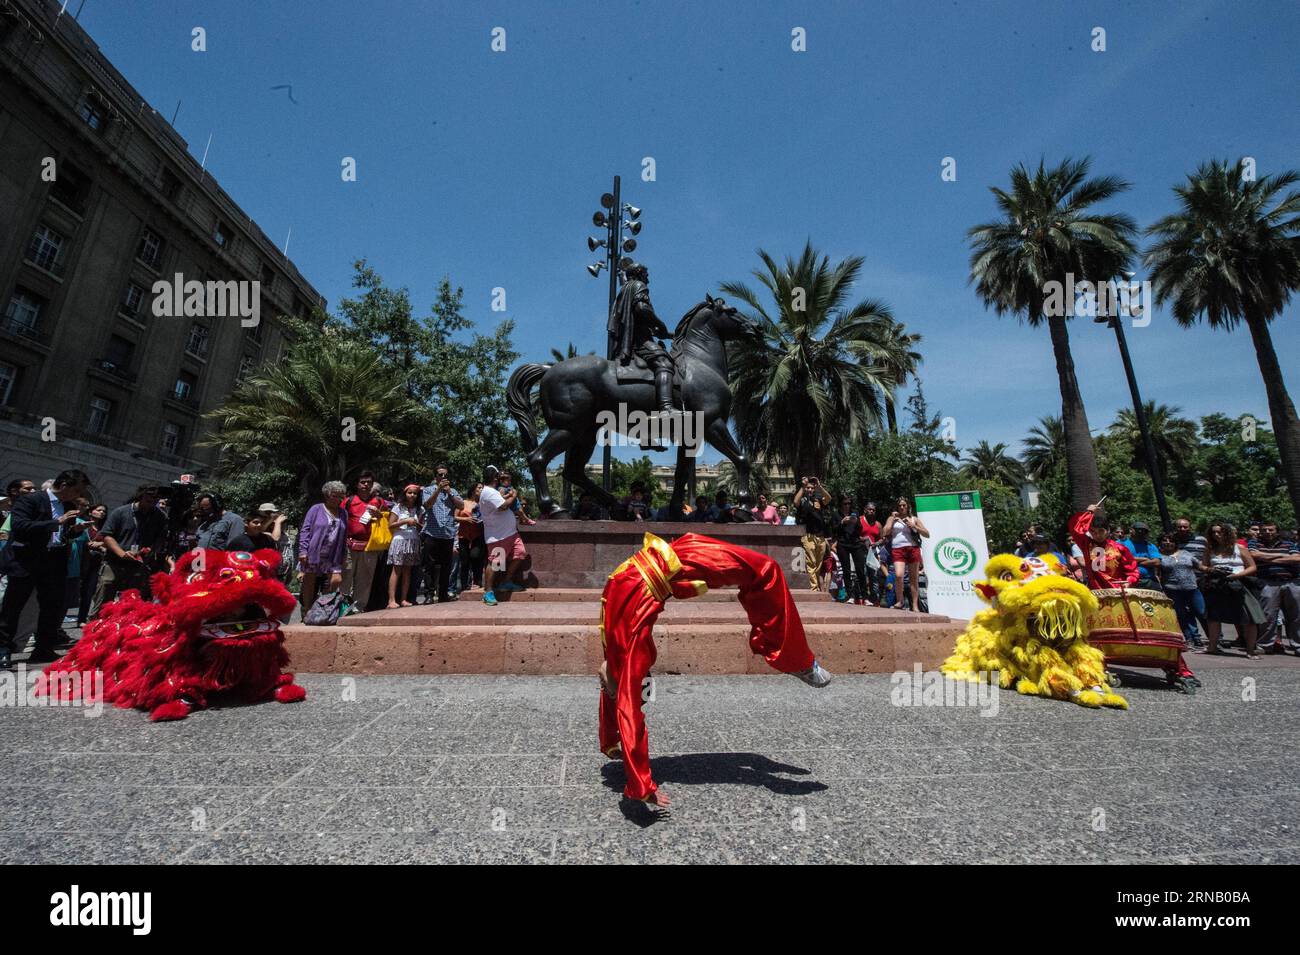 Dancers perform Lion Dance during the Chinese Lunar New Year and Feast of Santiago celebrations, at the Plaza de Armas in Santiago, capital of Chile, on Feb. 12, 2016. Feast of Santiago celebrates the 475th anniversary of the founding of the Chilean capital of Santiago by Pedro de Valdivia. Jorge Villegas) (jg) (fnc) CHILE-SANTIAGO-CHINA-LUNAR NEW YEAR e JORGExVILLEGAS PUBLICATIONxNOTxINxCHN   Dancers perform Lion Dance during The Chinese Lunar New Year and Feast of Santiago celebrations AT The Plaza de Armas in Santiago Capital of Chile ON Feb 12 2016 Feast of Santiago celebrates The 475th An Stock Photo